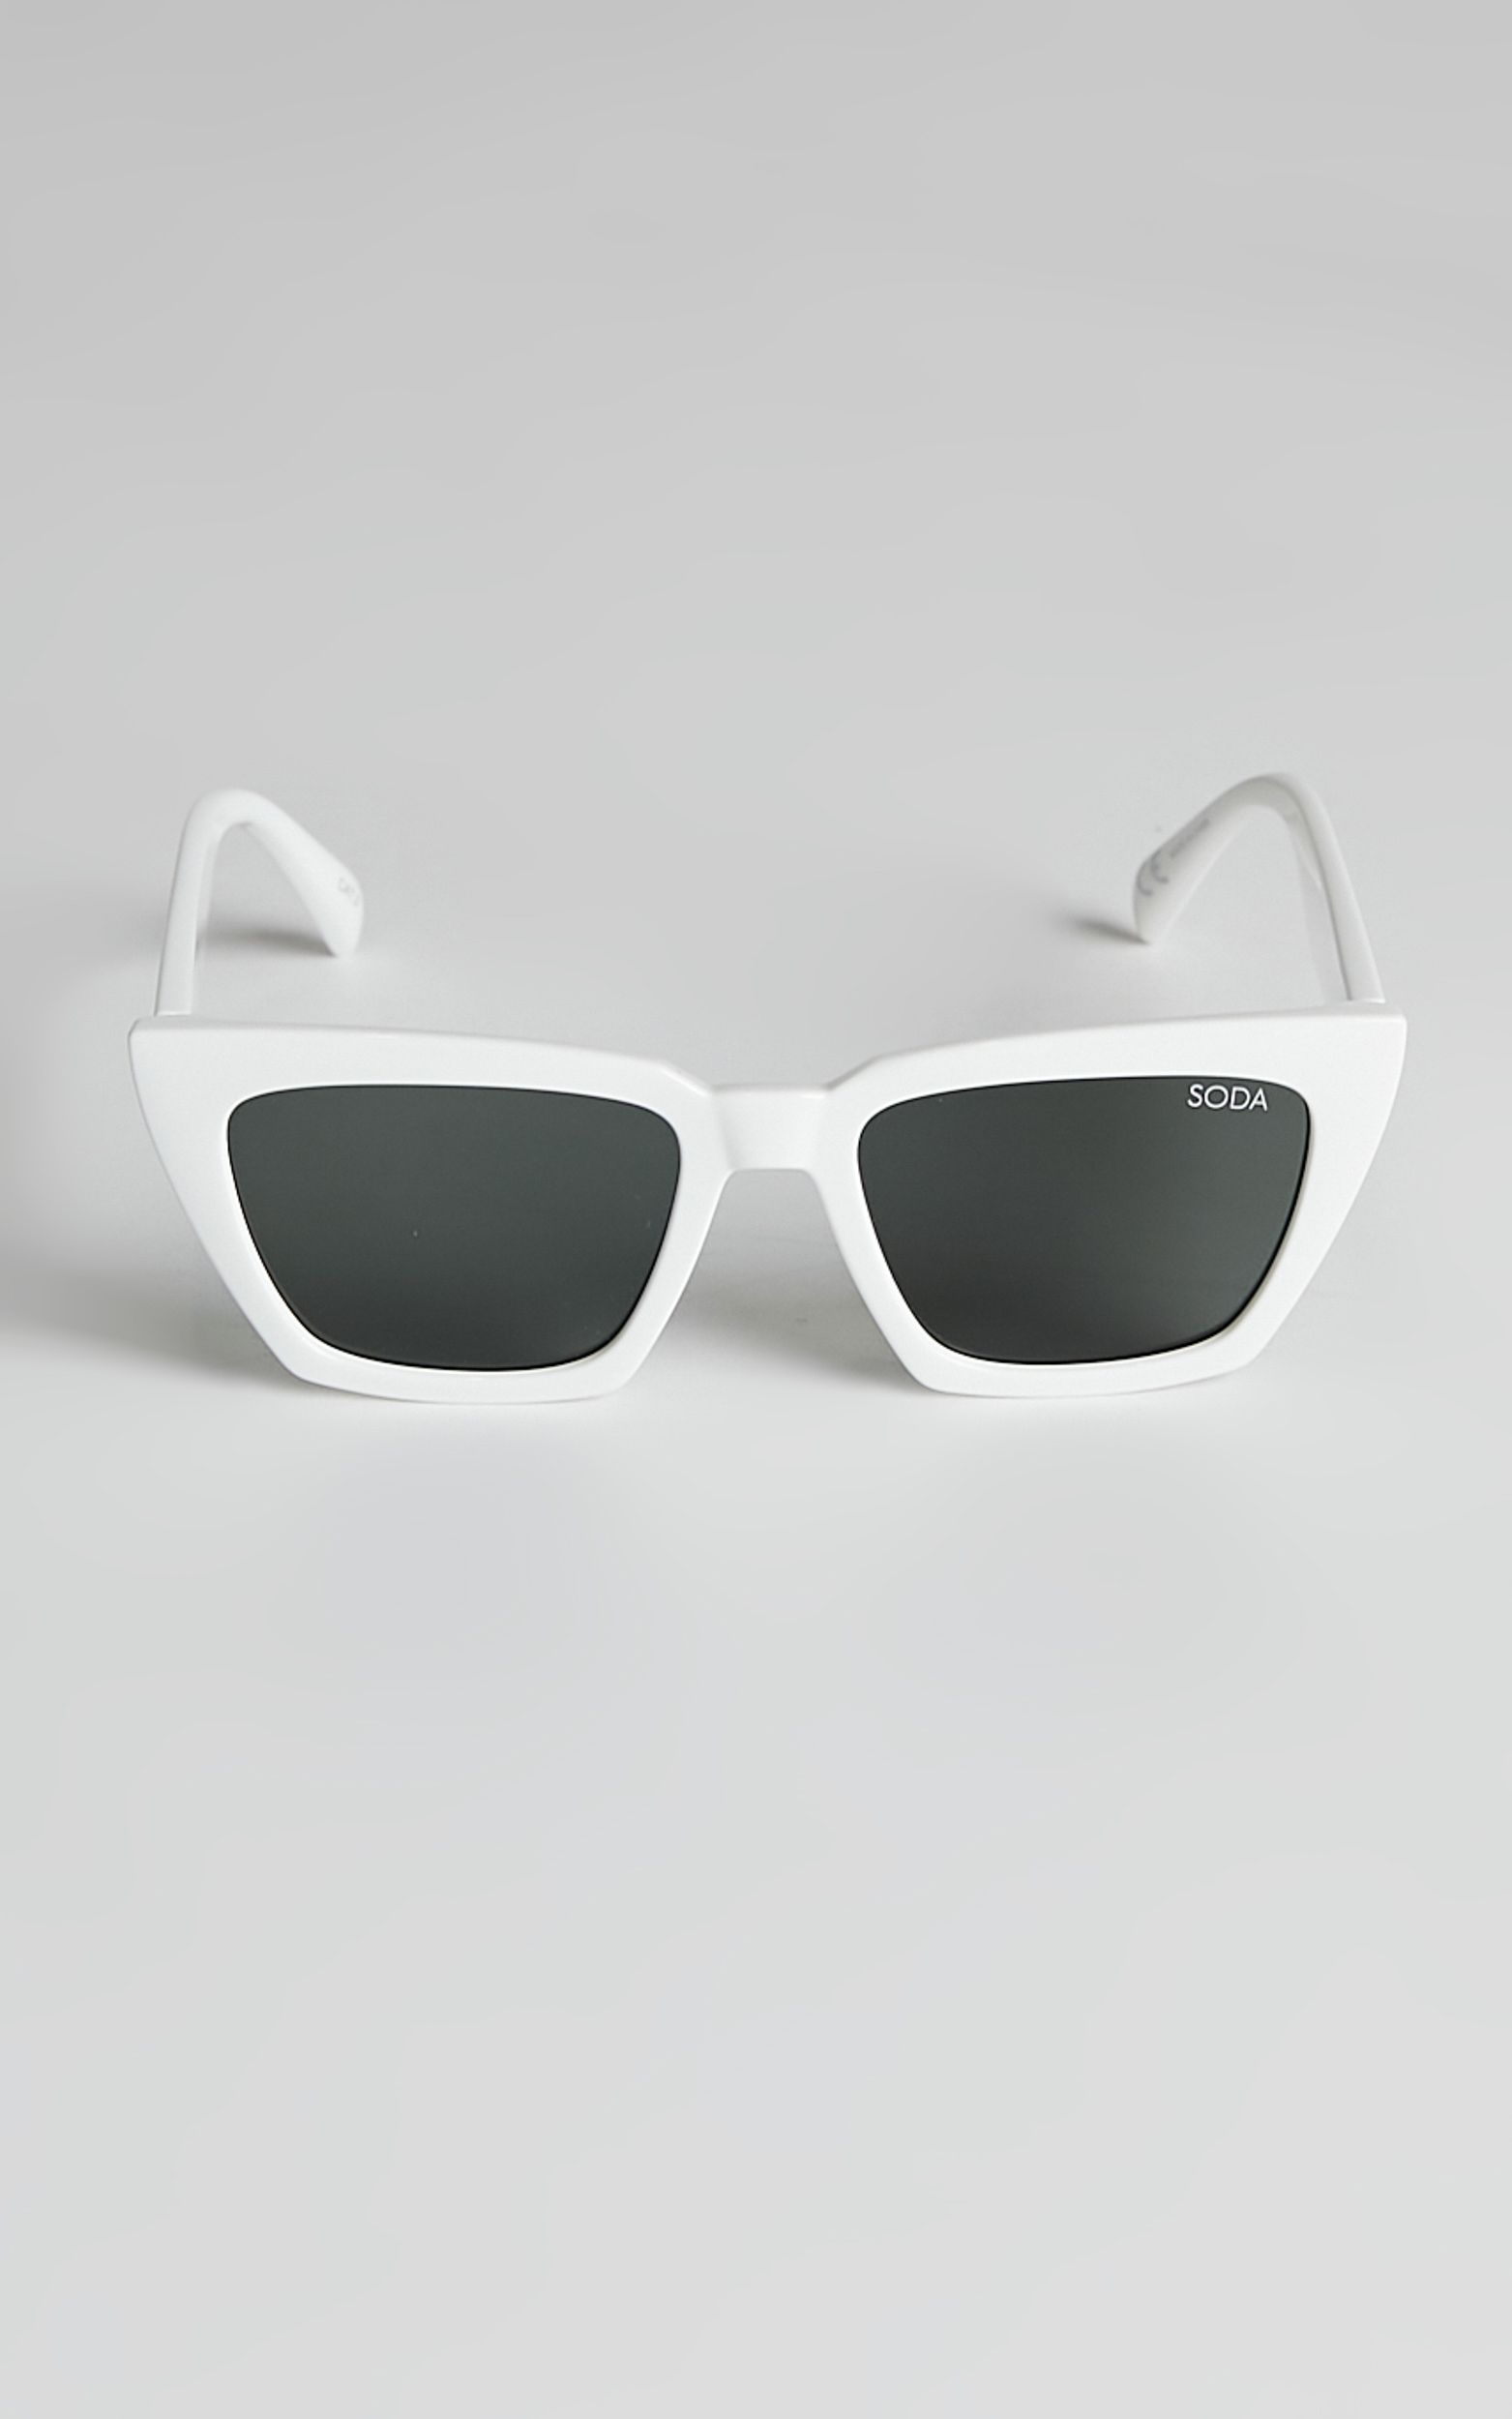 Soda Shades - Hailey Sunglasses in White - NoSize, WHT2, hi-res image number null